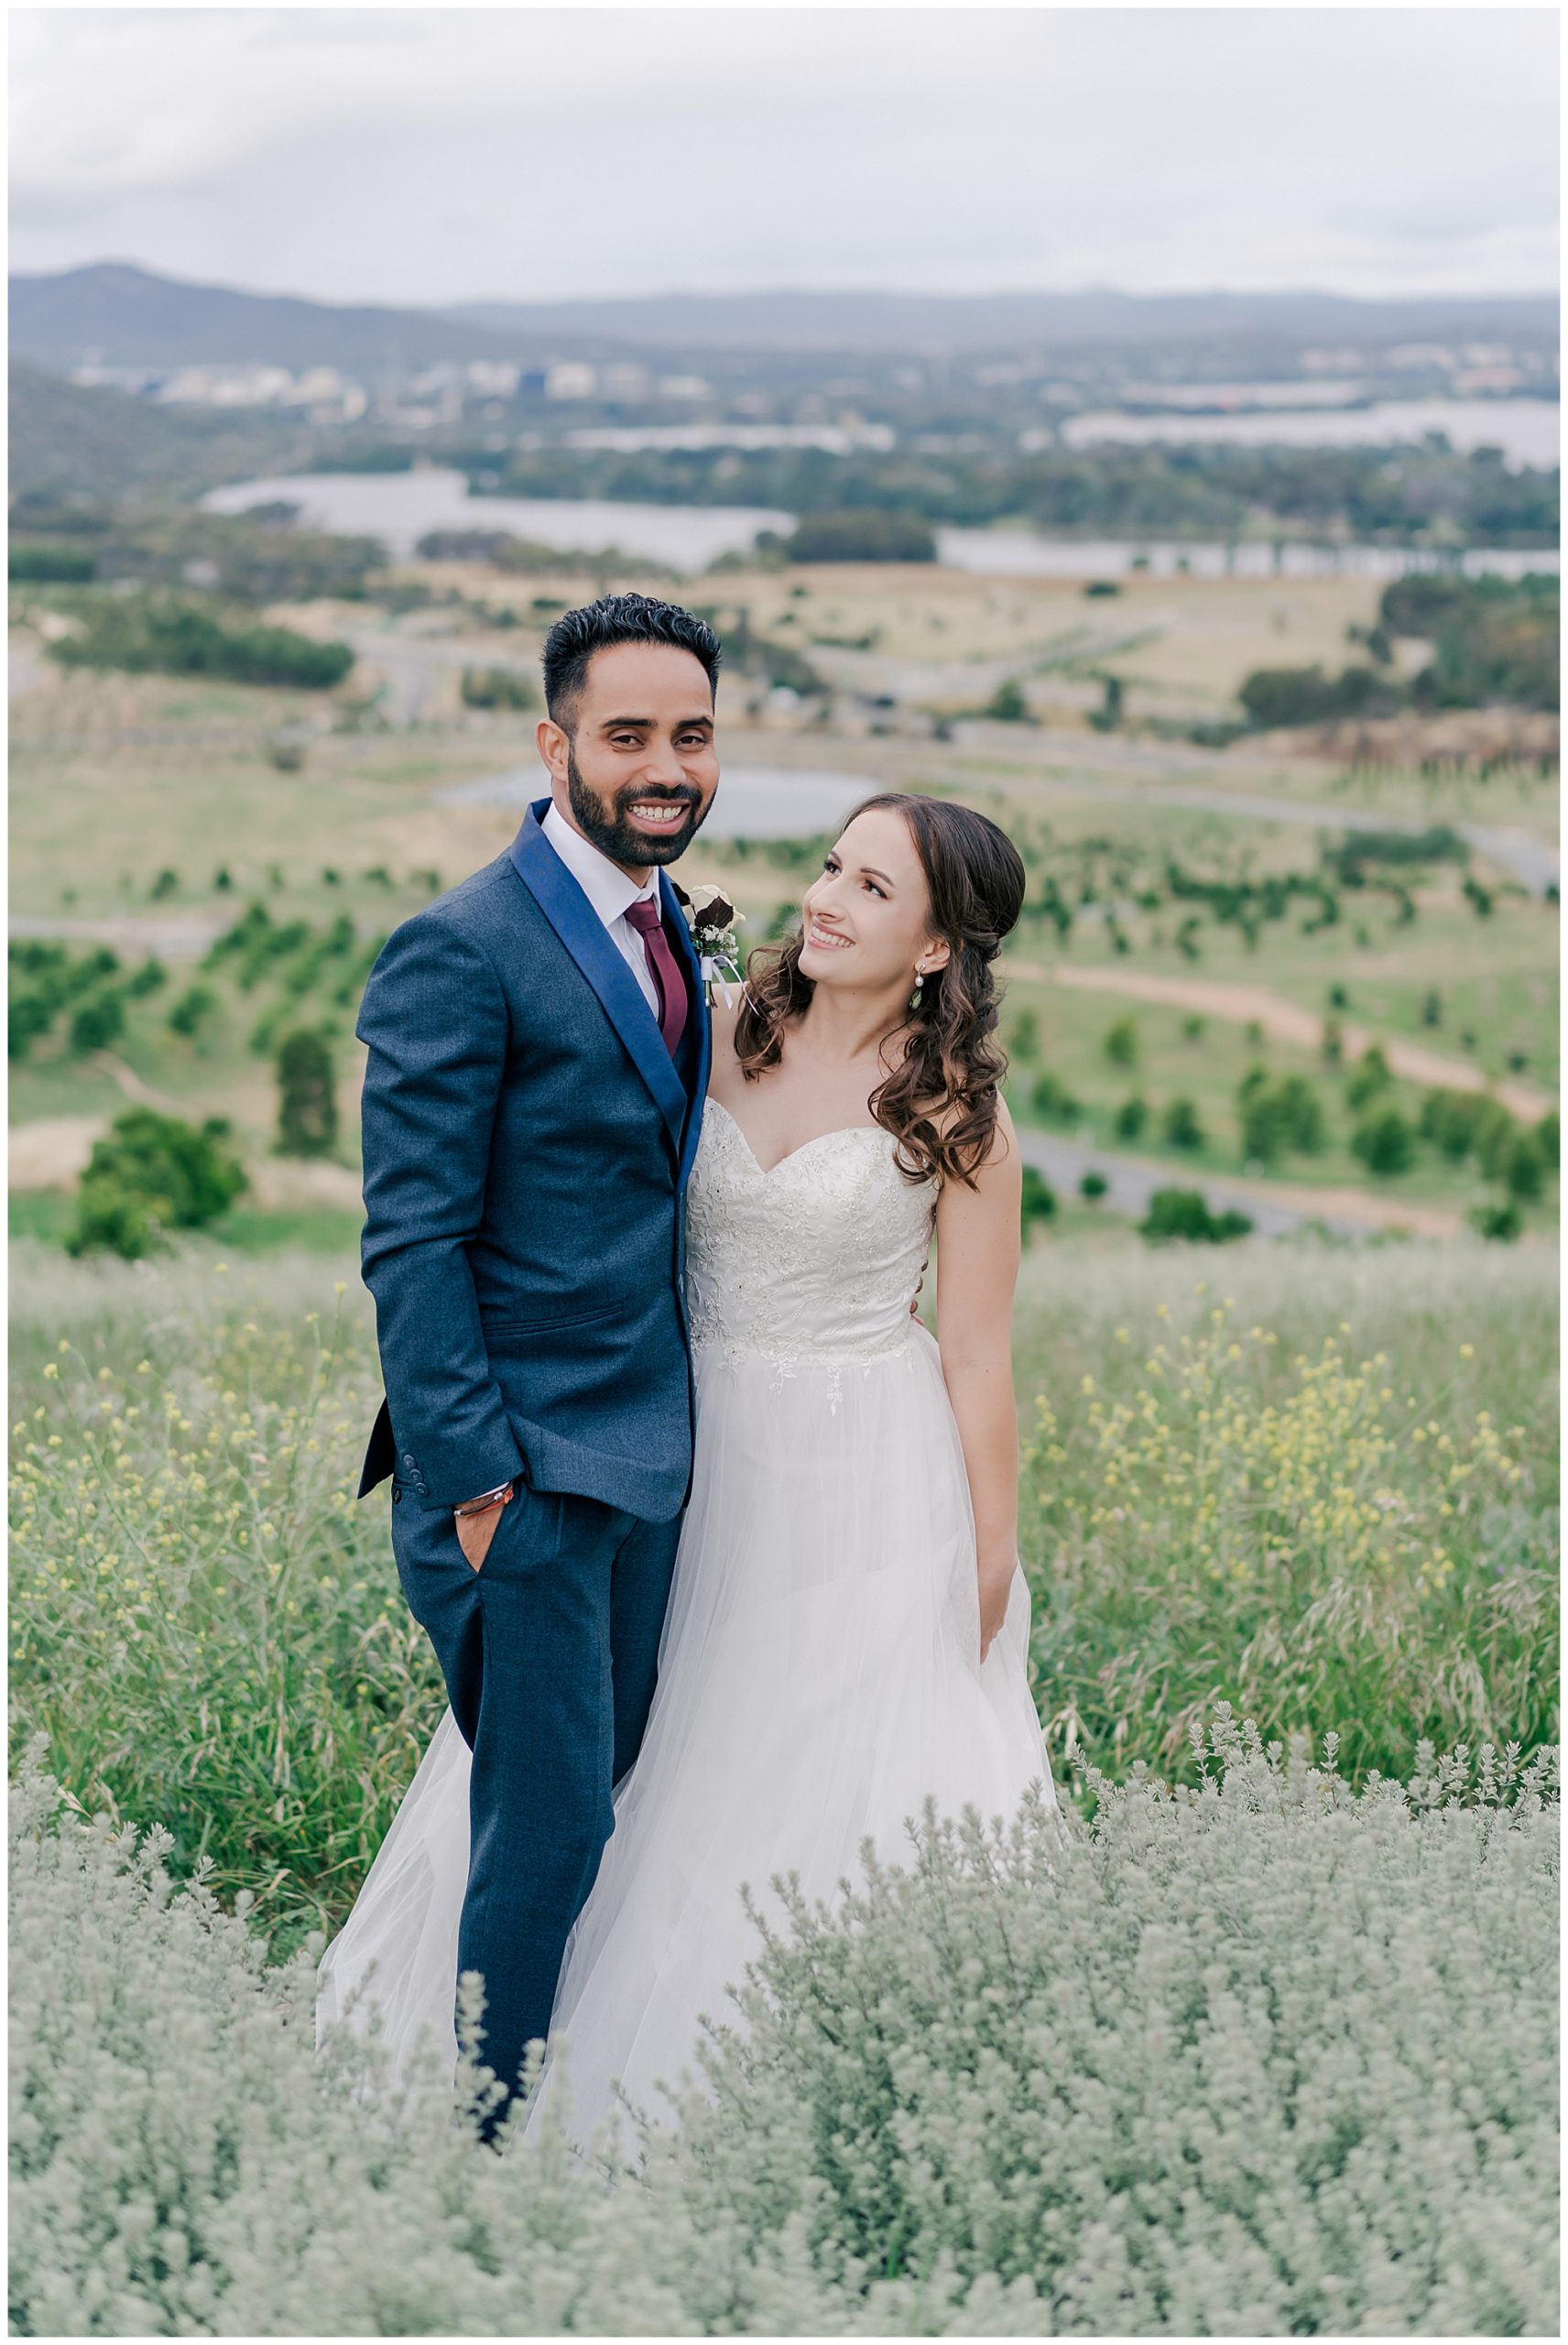 Getting married at the arboretum | Canberra wedding photographer